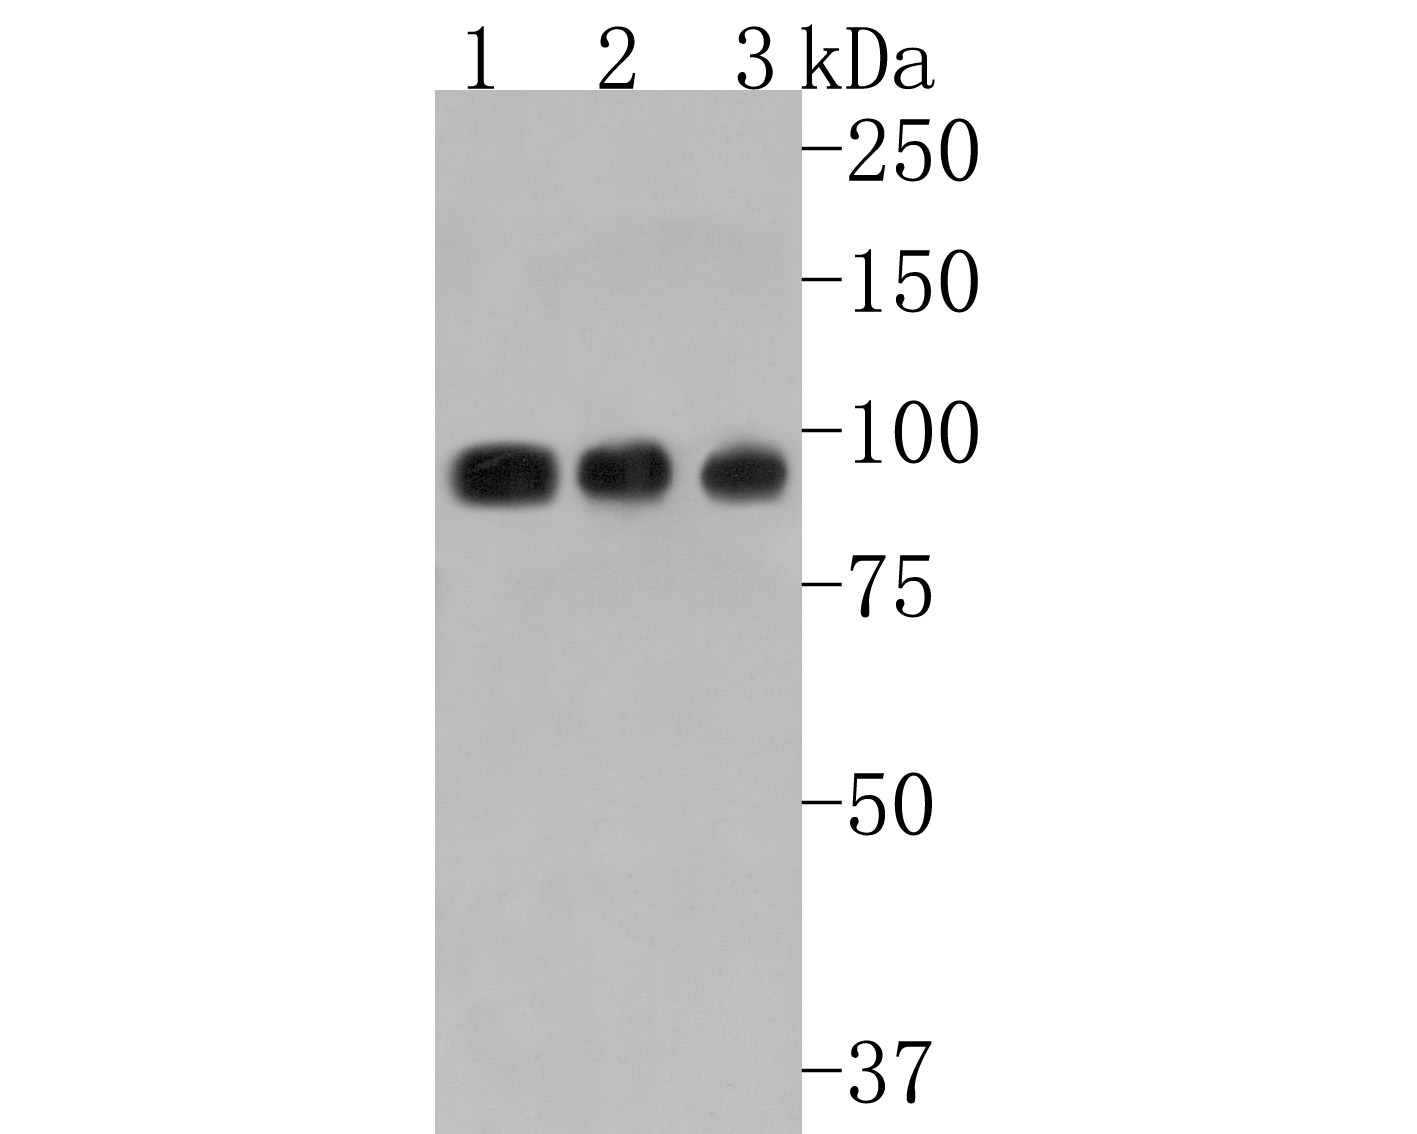 Western blot analysis of Villin1 on different lysates. Proteins were transferred to a PVDF membrane and blocked with 5% BSA in PBS for 1 hour at room temperature. The primary antibody (HA500509, 1/2,000) was used in 5% BSA at room temperature for 2 hours. Goat Anti-Rabbit IgG - HRP Secondary Antibody (HA1001) at 1:200,000 dilution was used for 1 hour at room temperature.<br />
Positive control: <br />
Lane 1: Mouse colon tissue lysate<br />
Lane 2: Rat kidney tissue lysate<br />
Lane 2: Rat colon tissue lysate